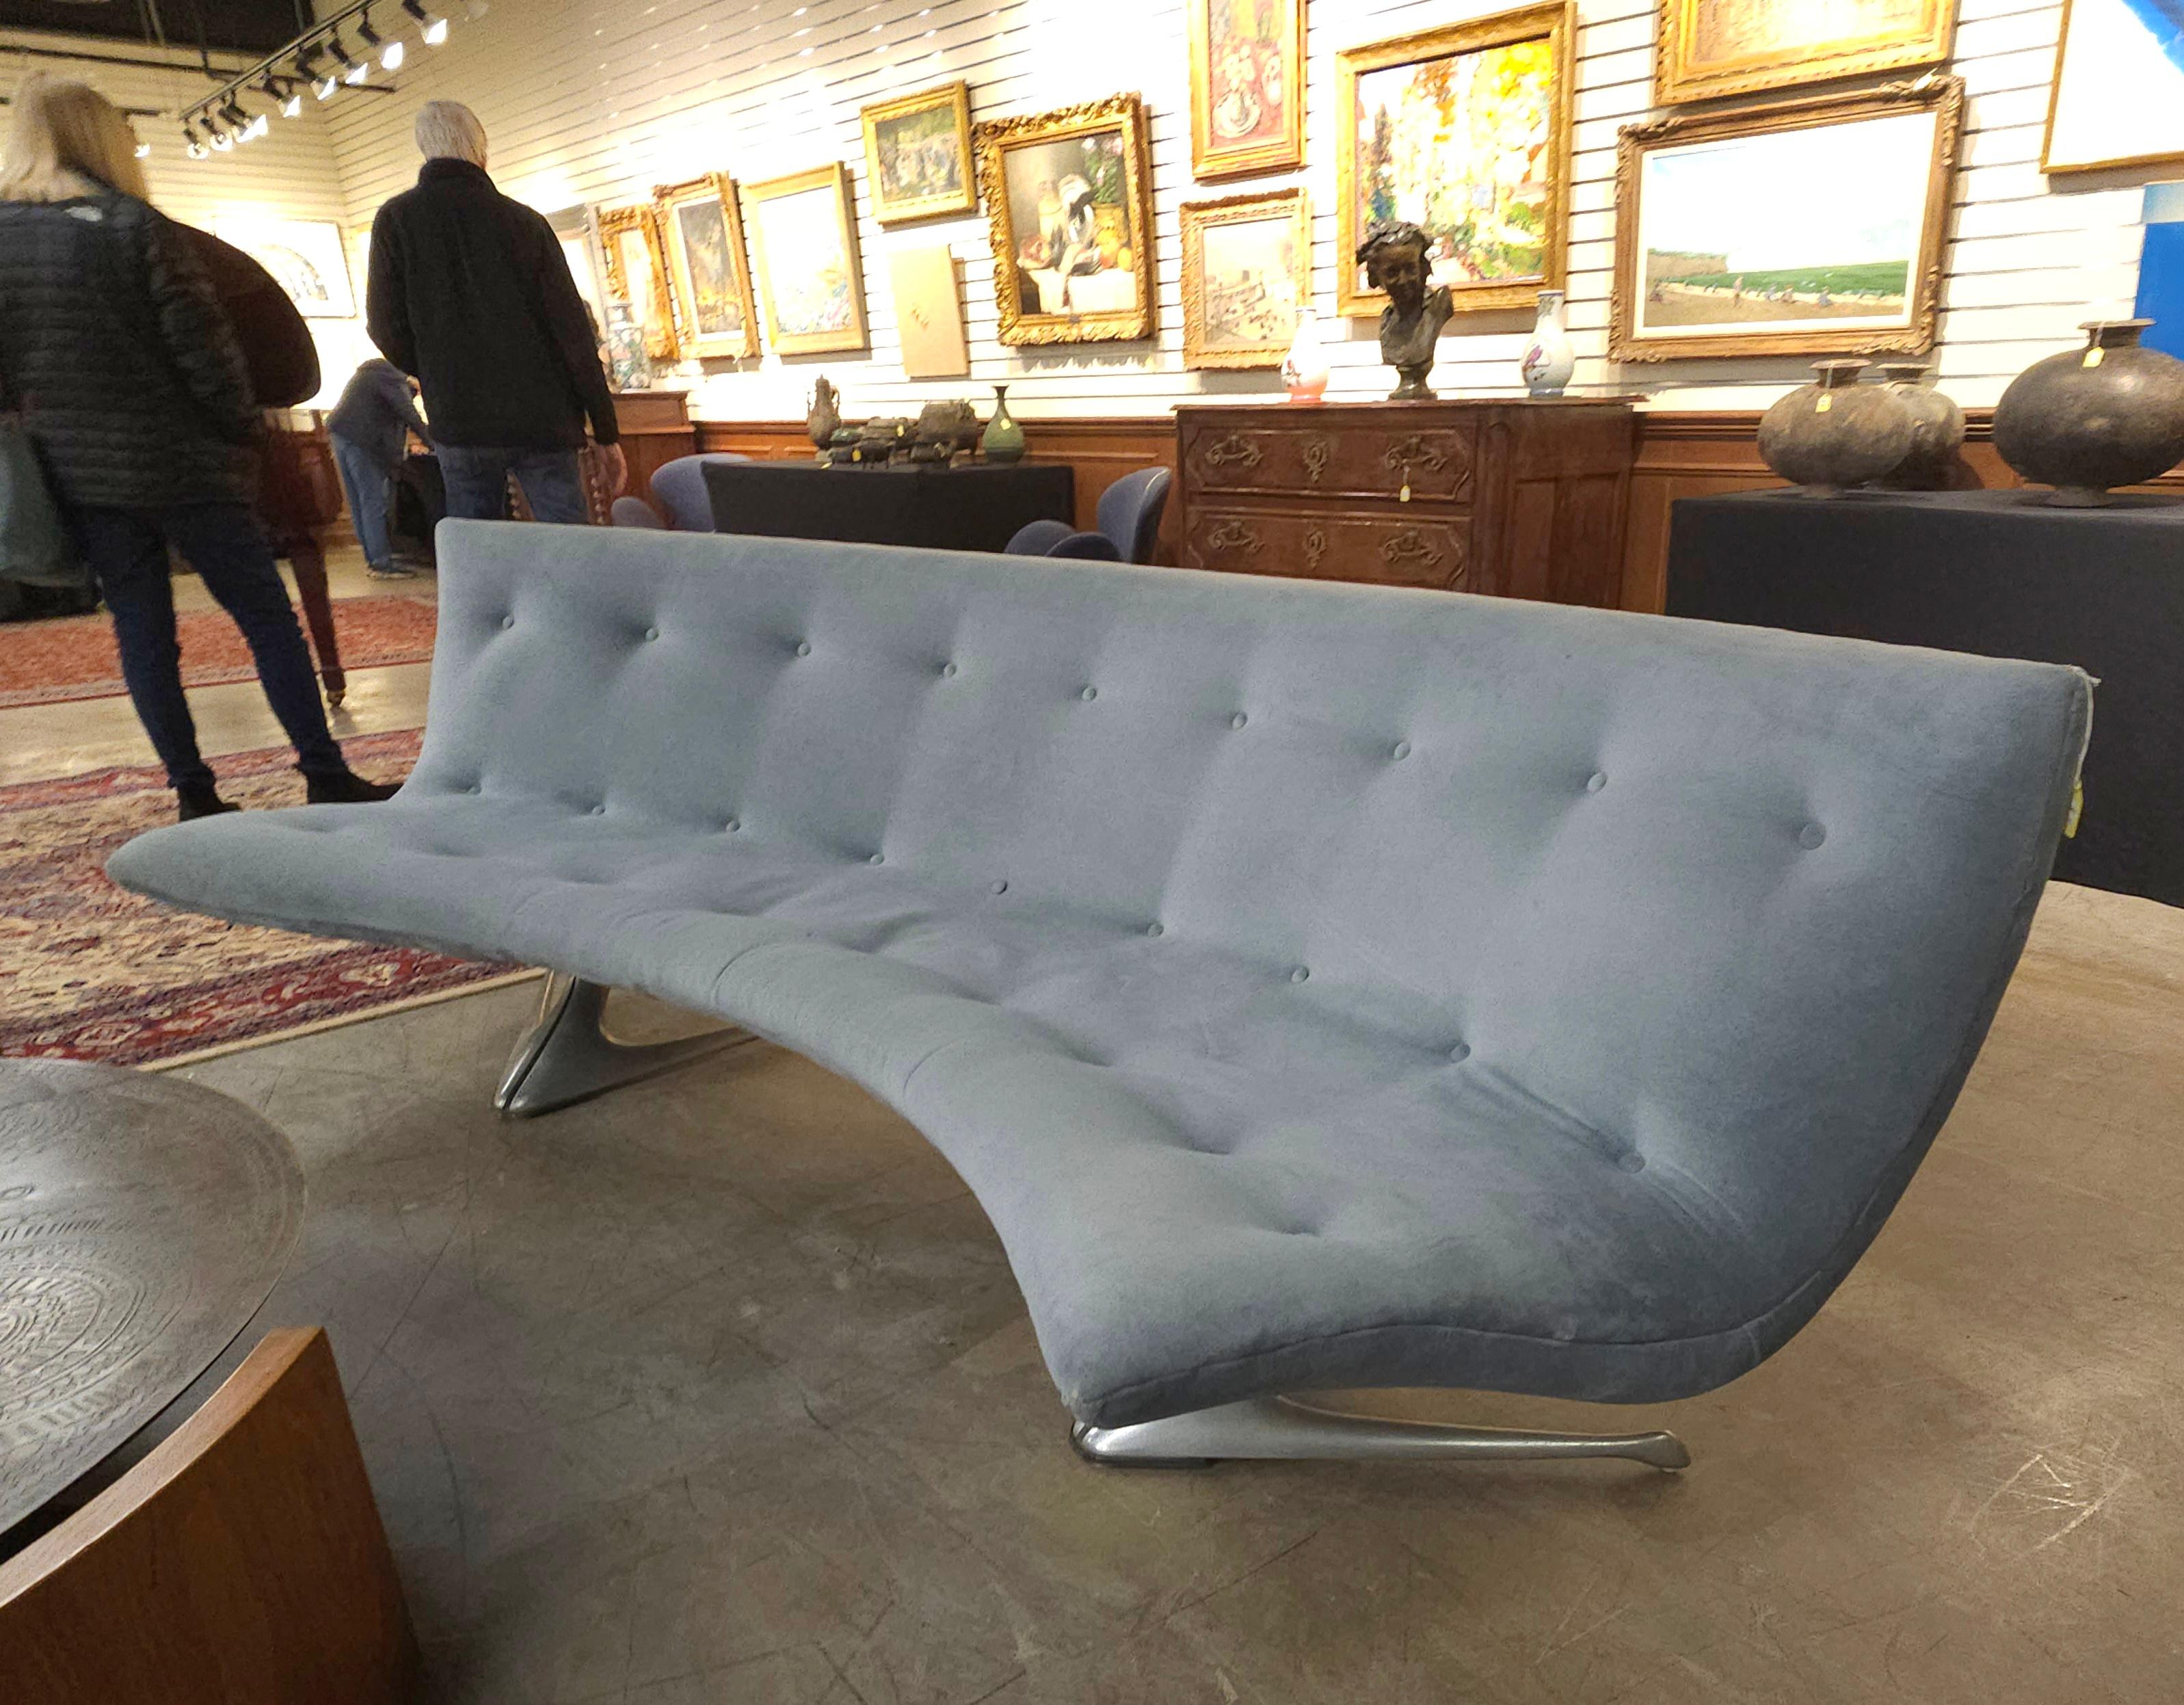 A Iconic Vladimir Kagan (1927-1988) Tufted Livid Velvet Upholstered Cast Aluminum 'Unicorn' Sofa, Model U522, Introduced 1960, Late 1960'S.
Vladimir Kagan began experimenting with Aluminum in the 1950s when he was partnered with Hugo Dreyfuss, first